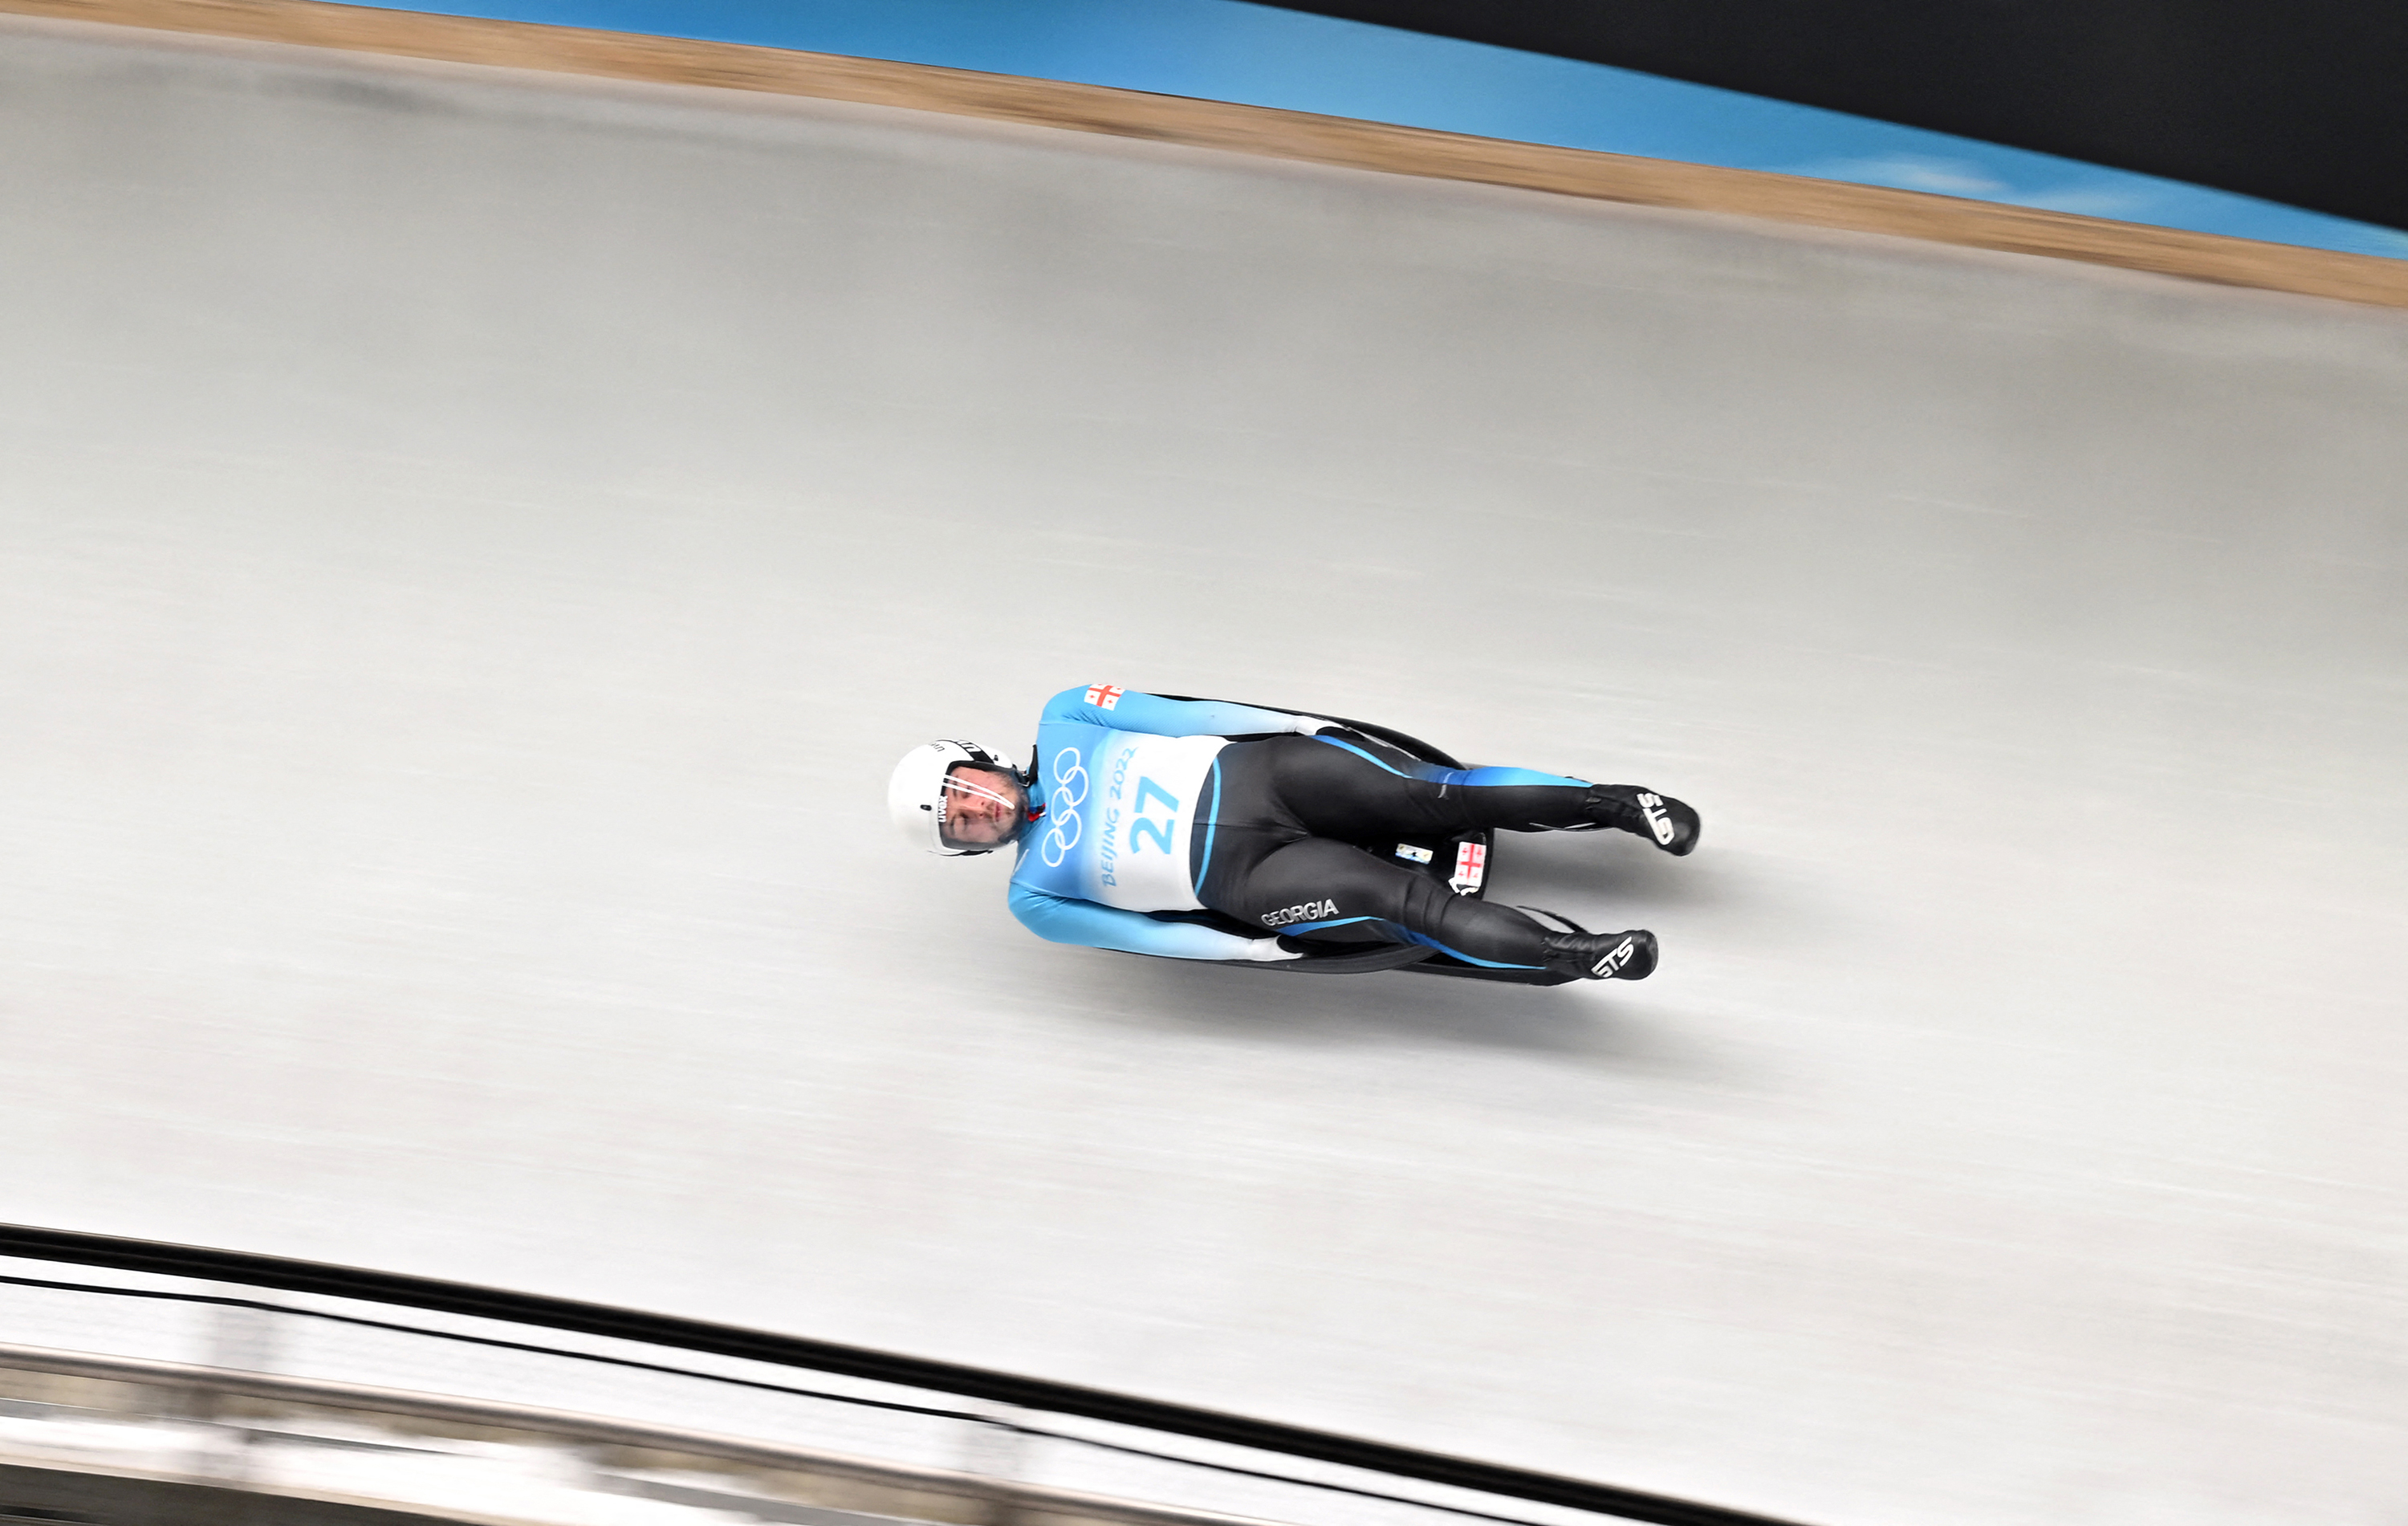 Almost 12 years after his cousin died in luge crash, Georgian slider completes first two runs